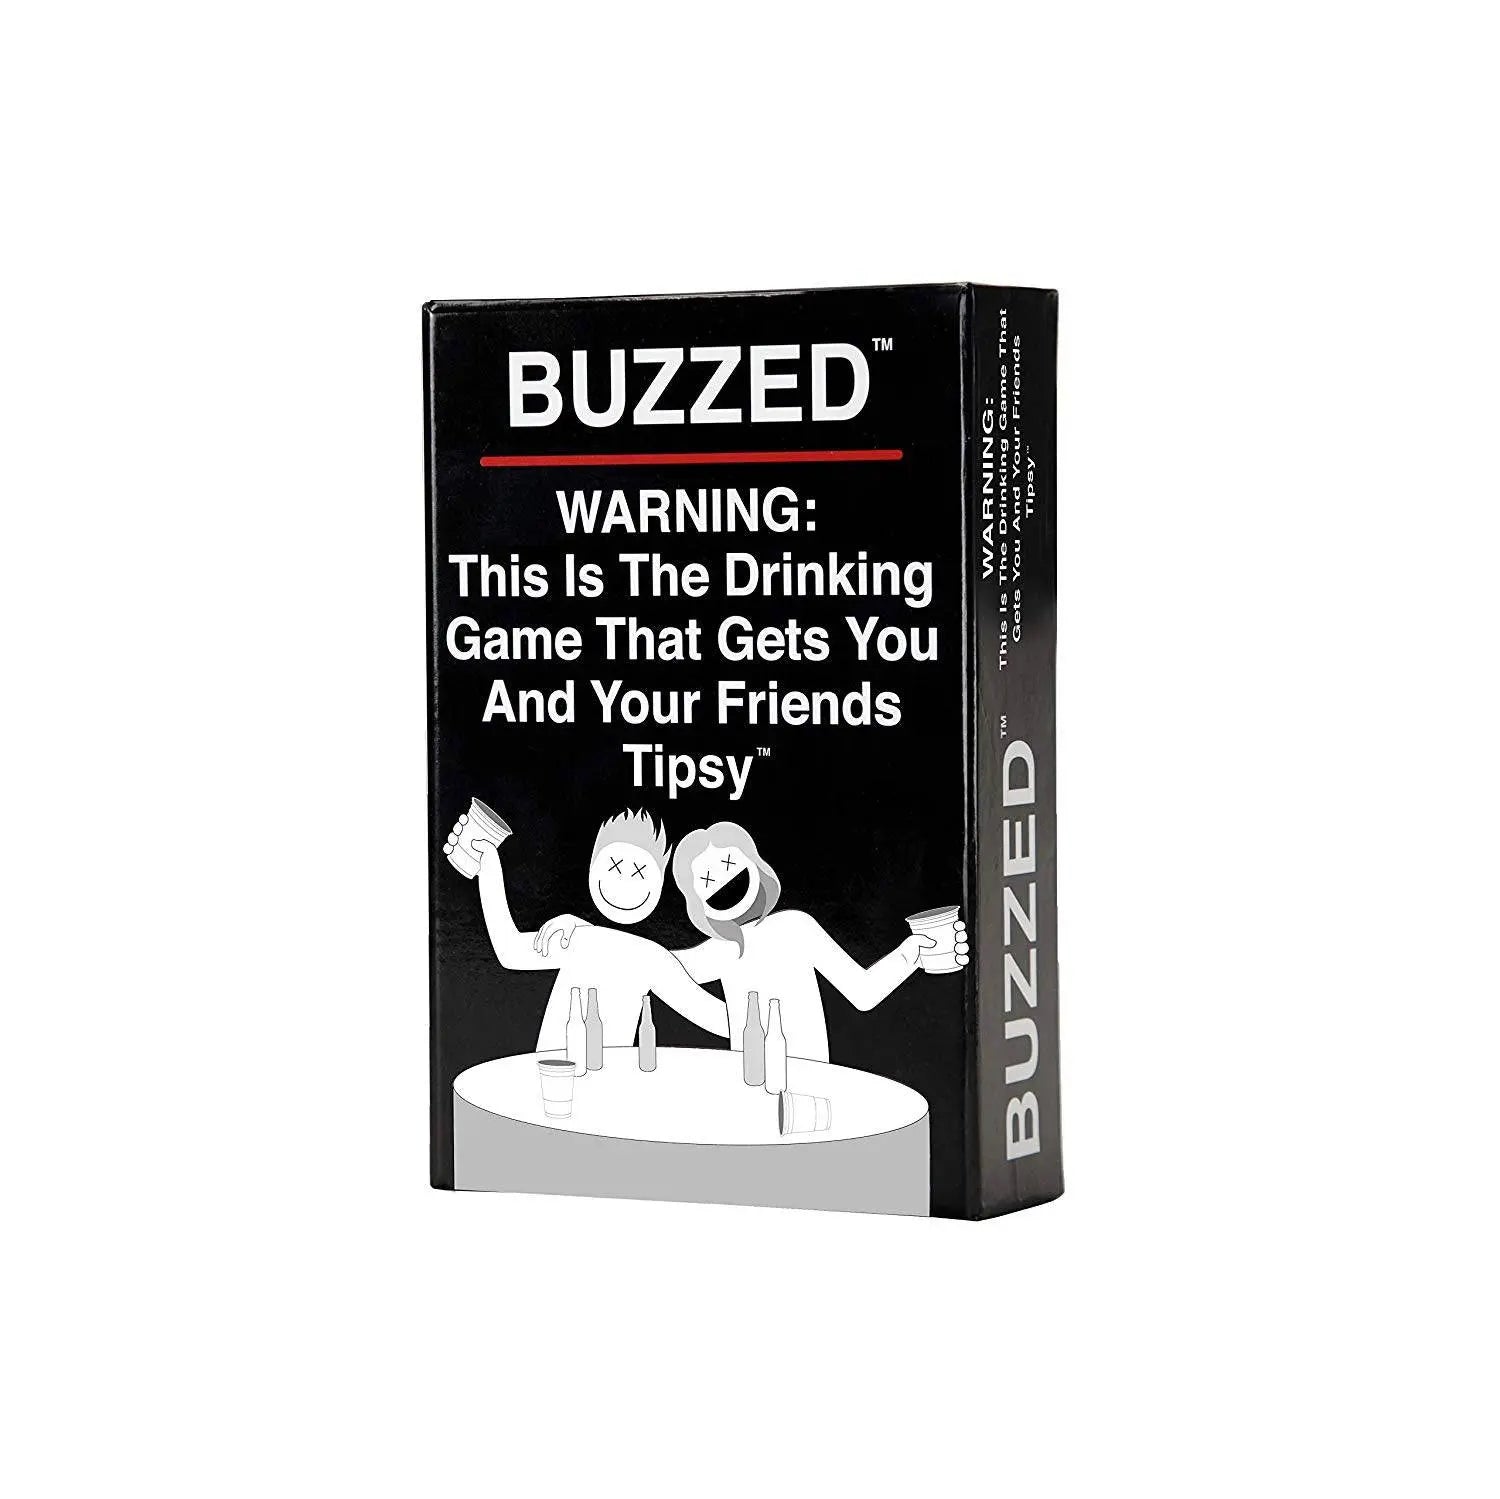 Buzzed - This is The Drinking Game That Gets You and Your Friends Tipsy! King Gaming